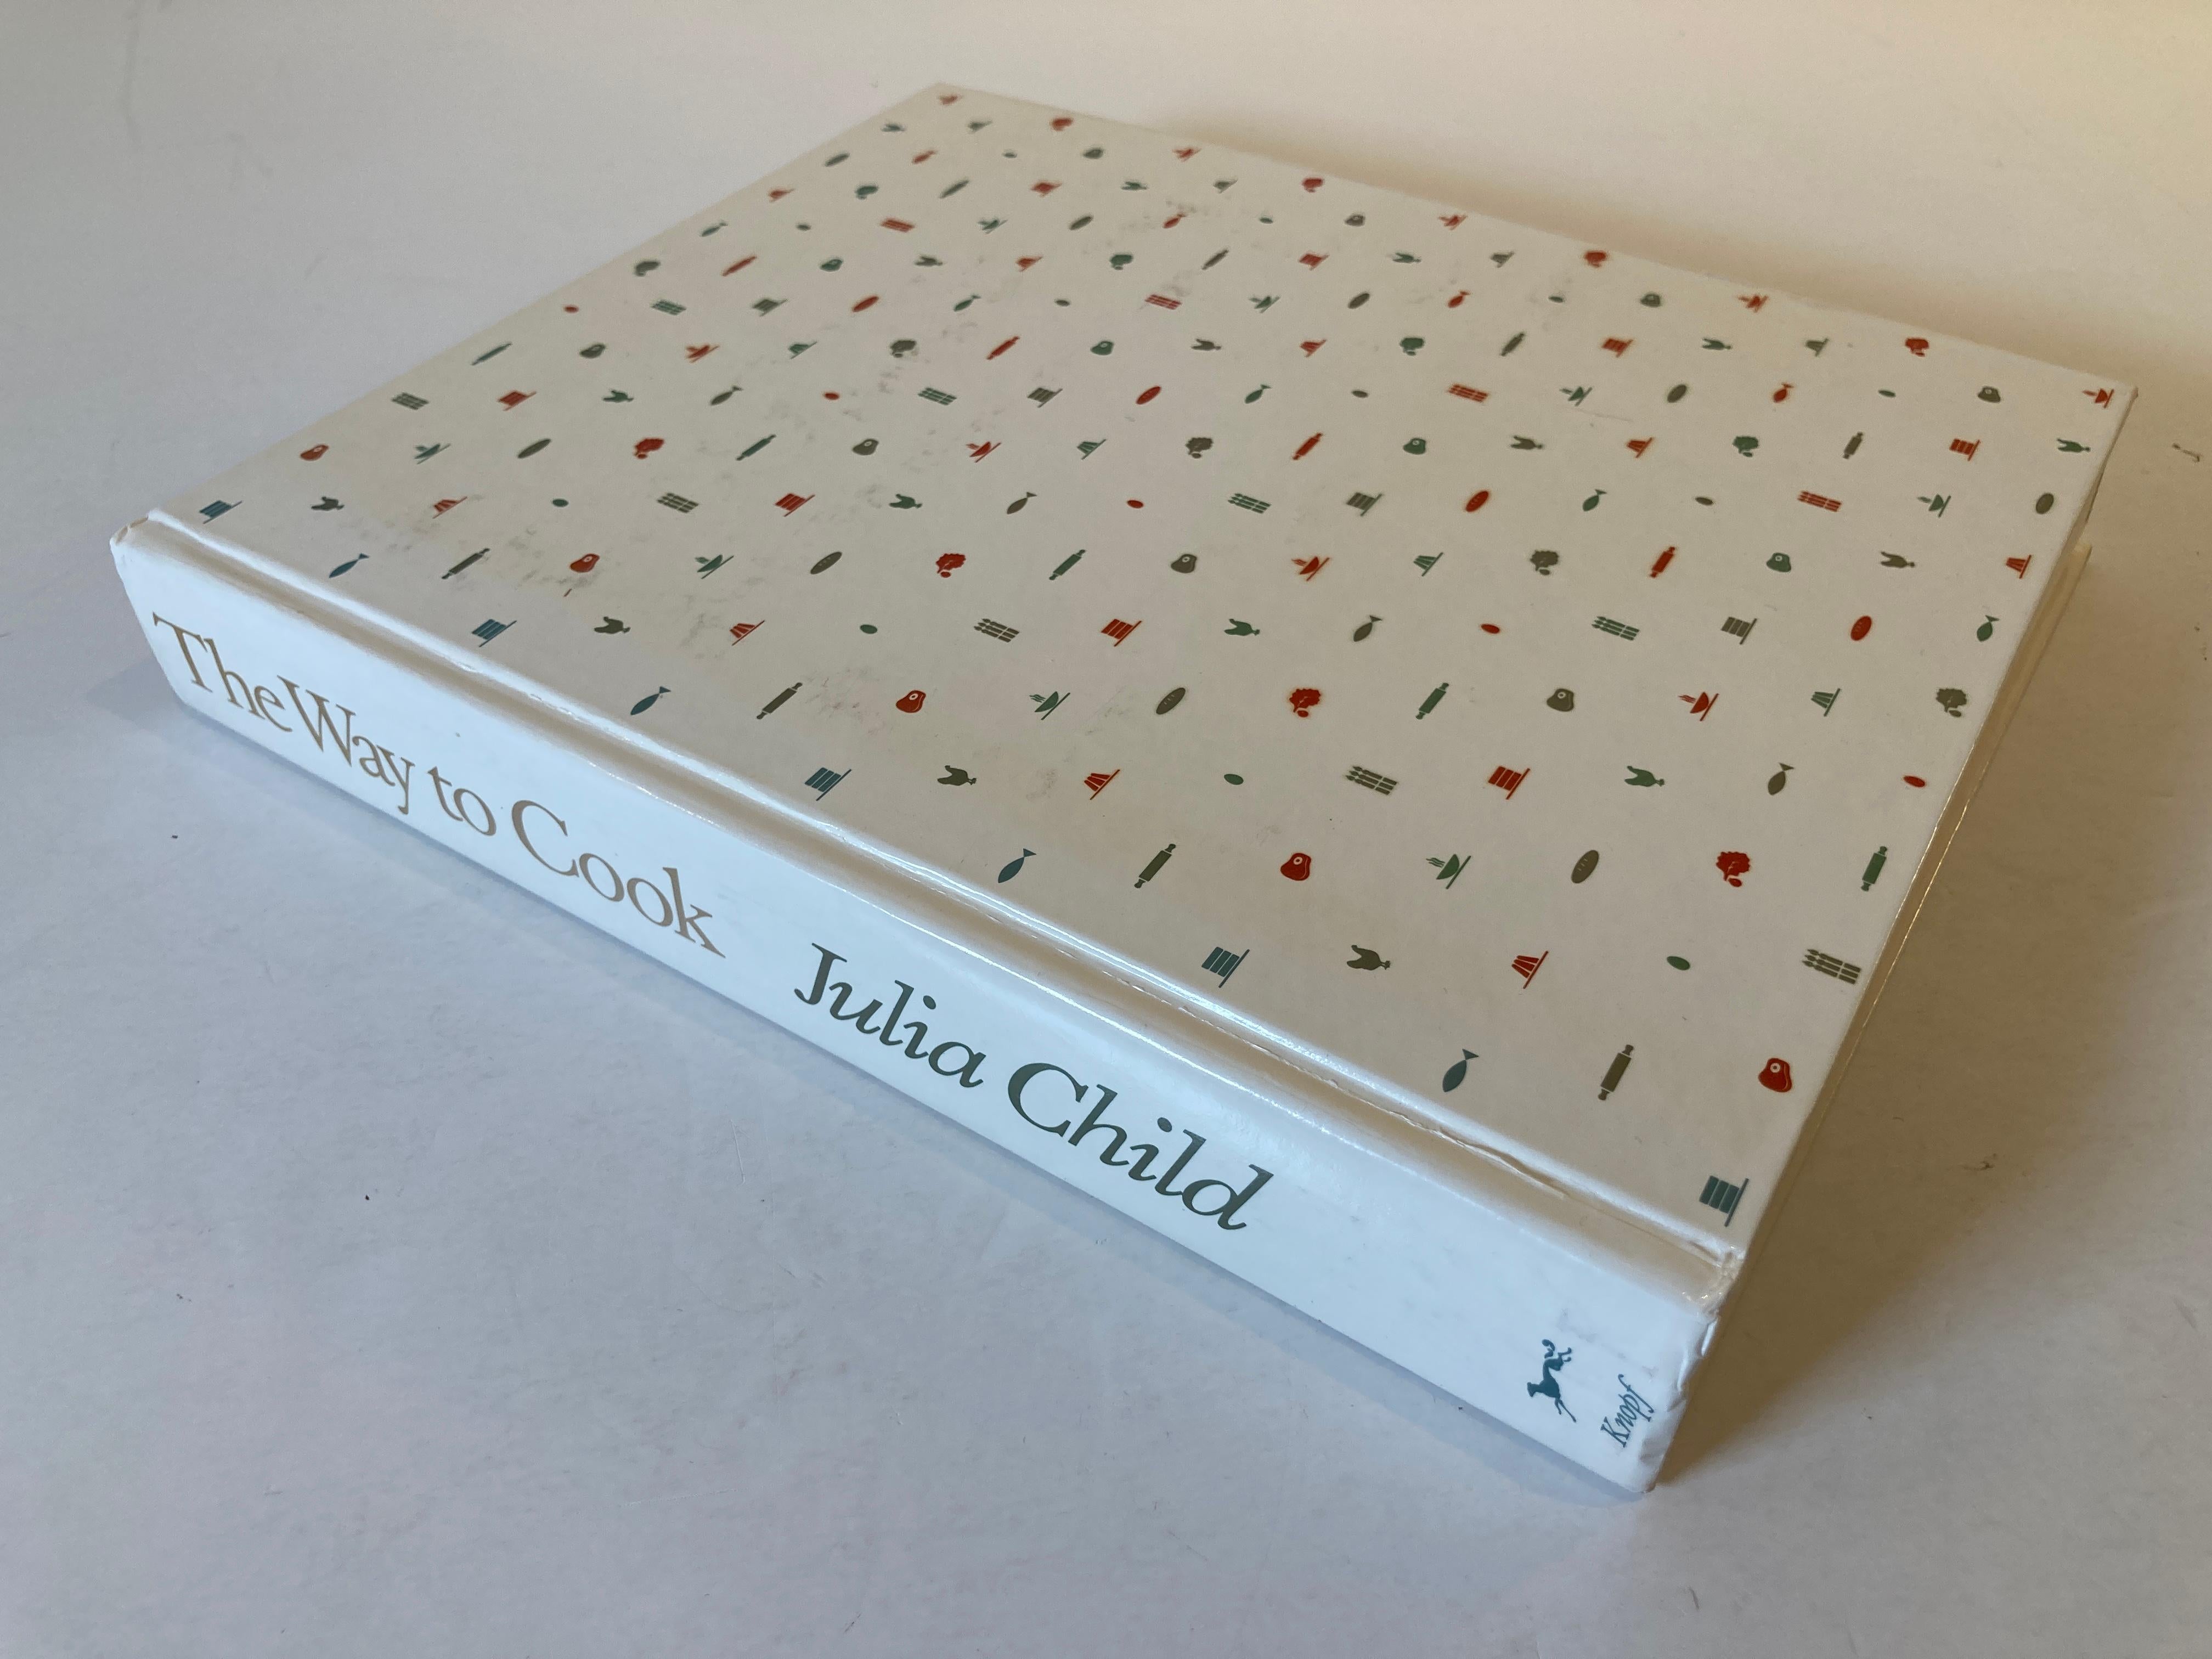 Julia Child The Way To Cook 1989, Knopf Cook Book 6